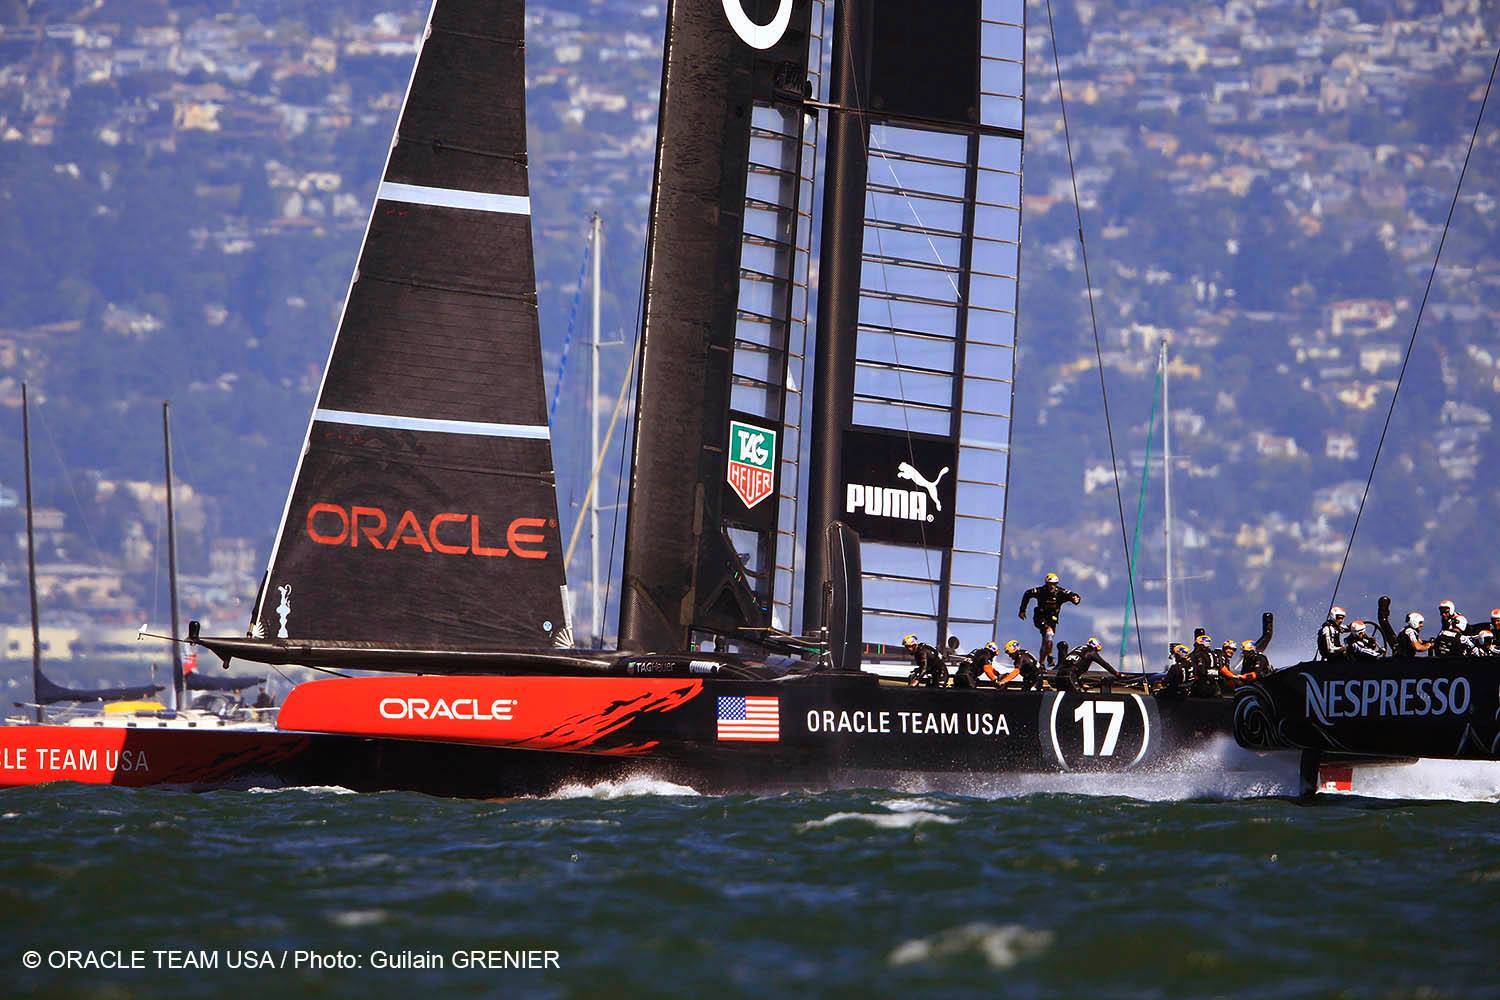 TAG Heuer Celebrates Oracle Team USA Win at America’s Cup